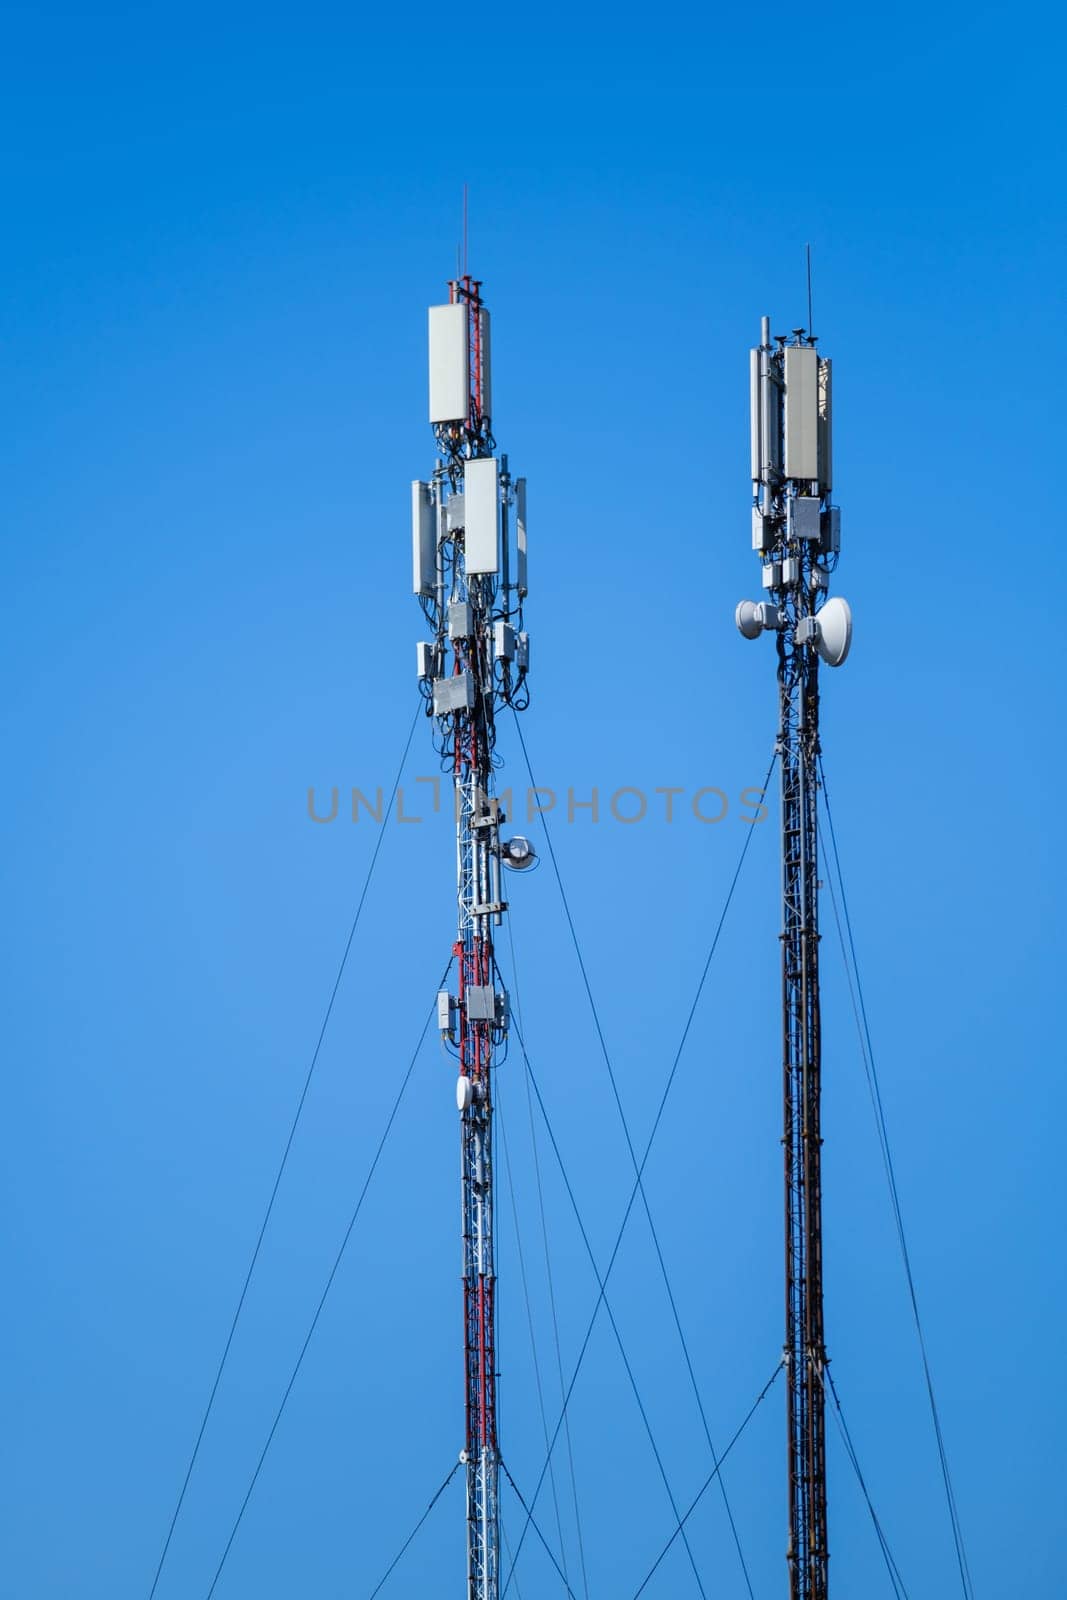 Technology of telecommunication GSM 5G,4G,3G tower. Cellular phone antennas on a building roof. Receiving and transmitting stations with blue skies on the background.